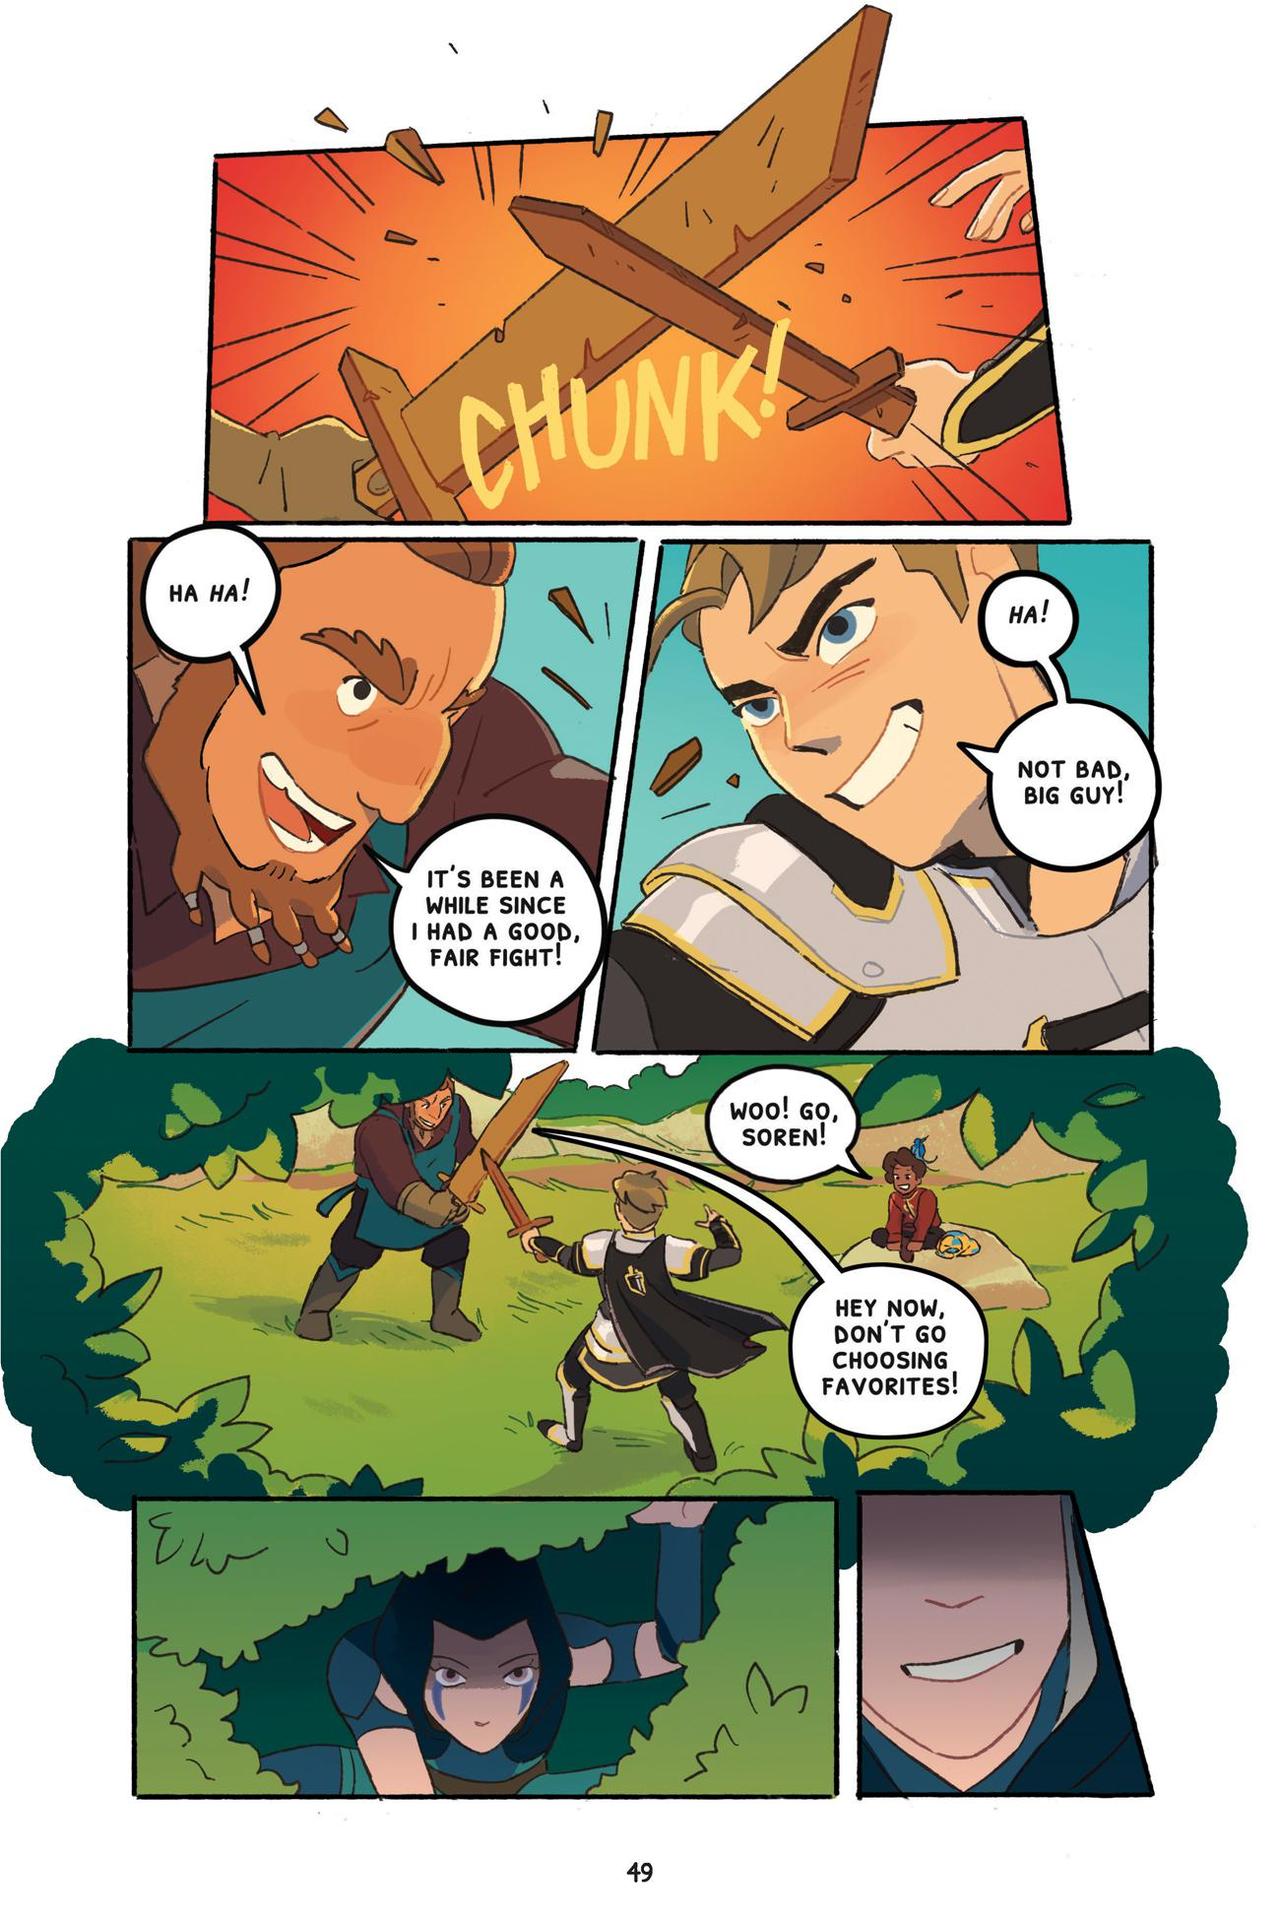 Through the Moon: The Dragon Prince Graphic Novel (2020) Chapter 1 - Page 53